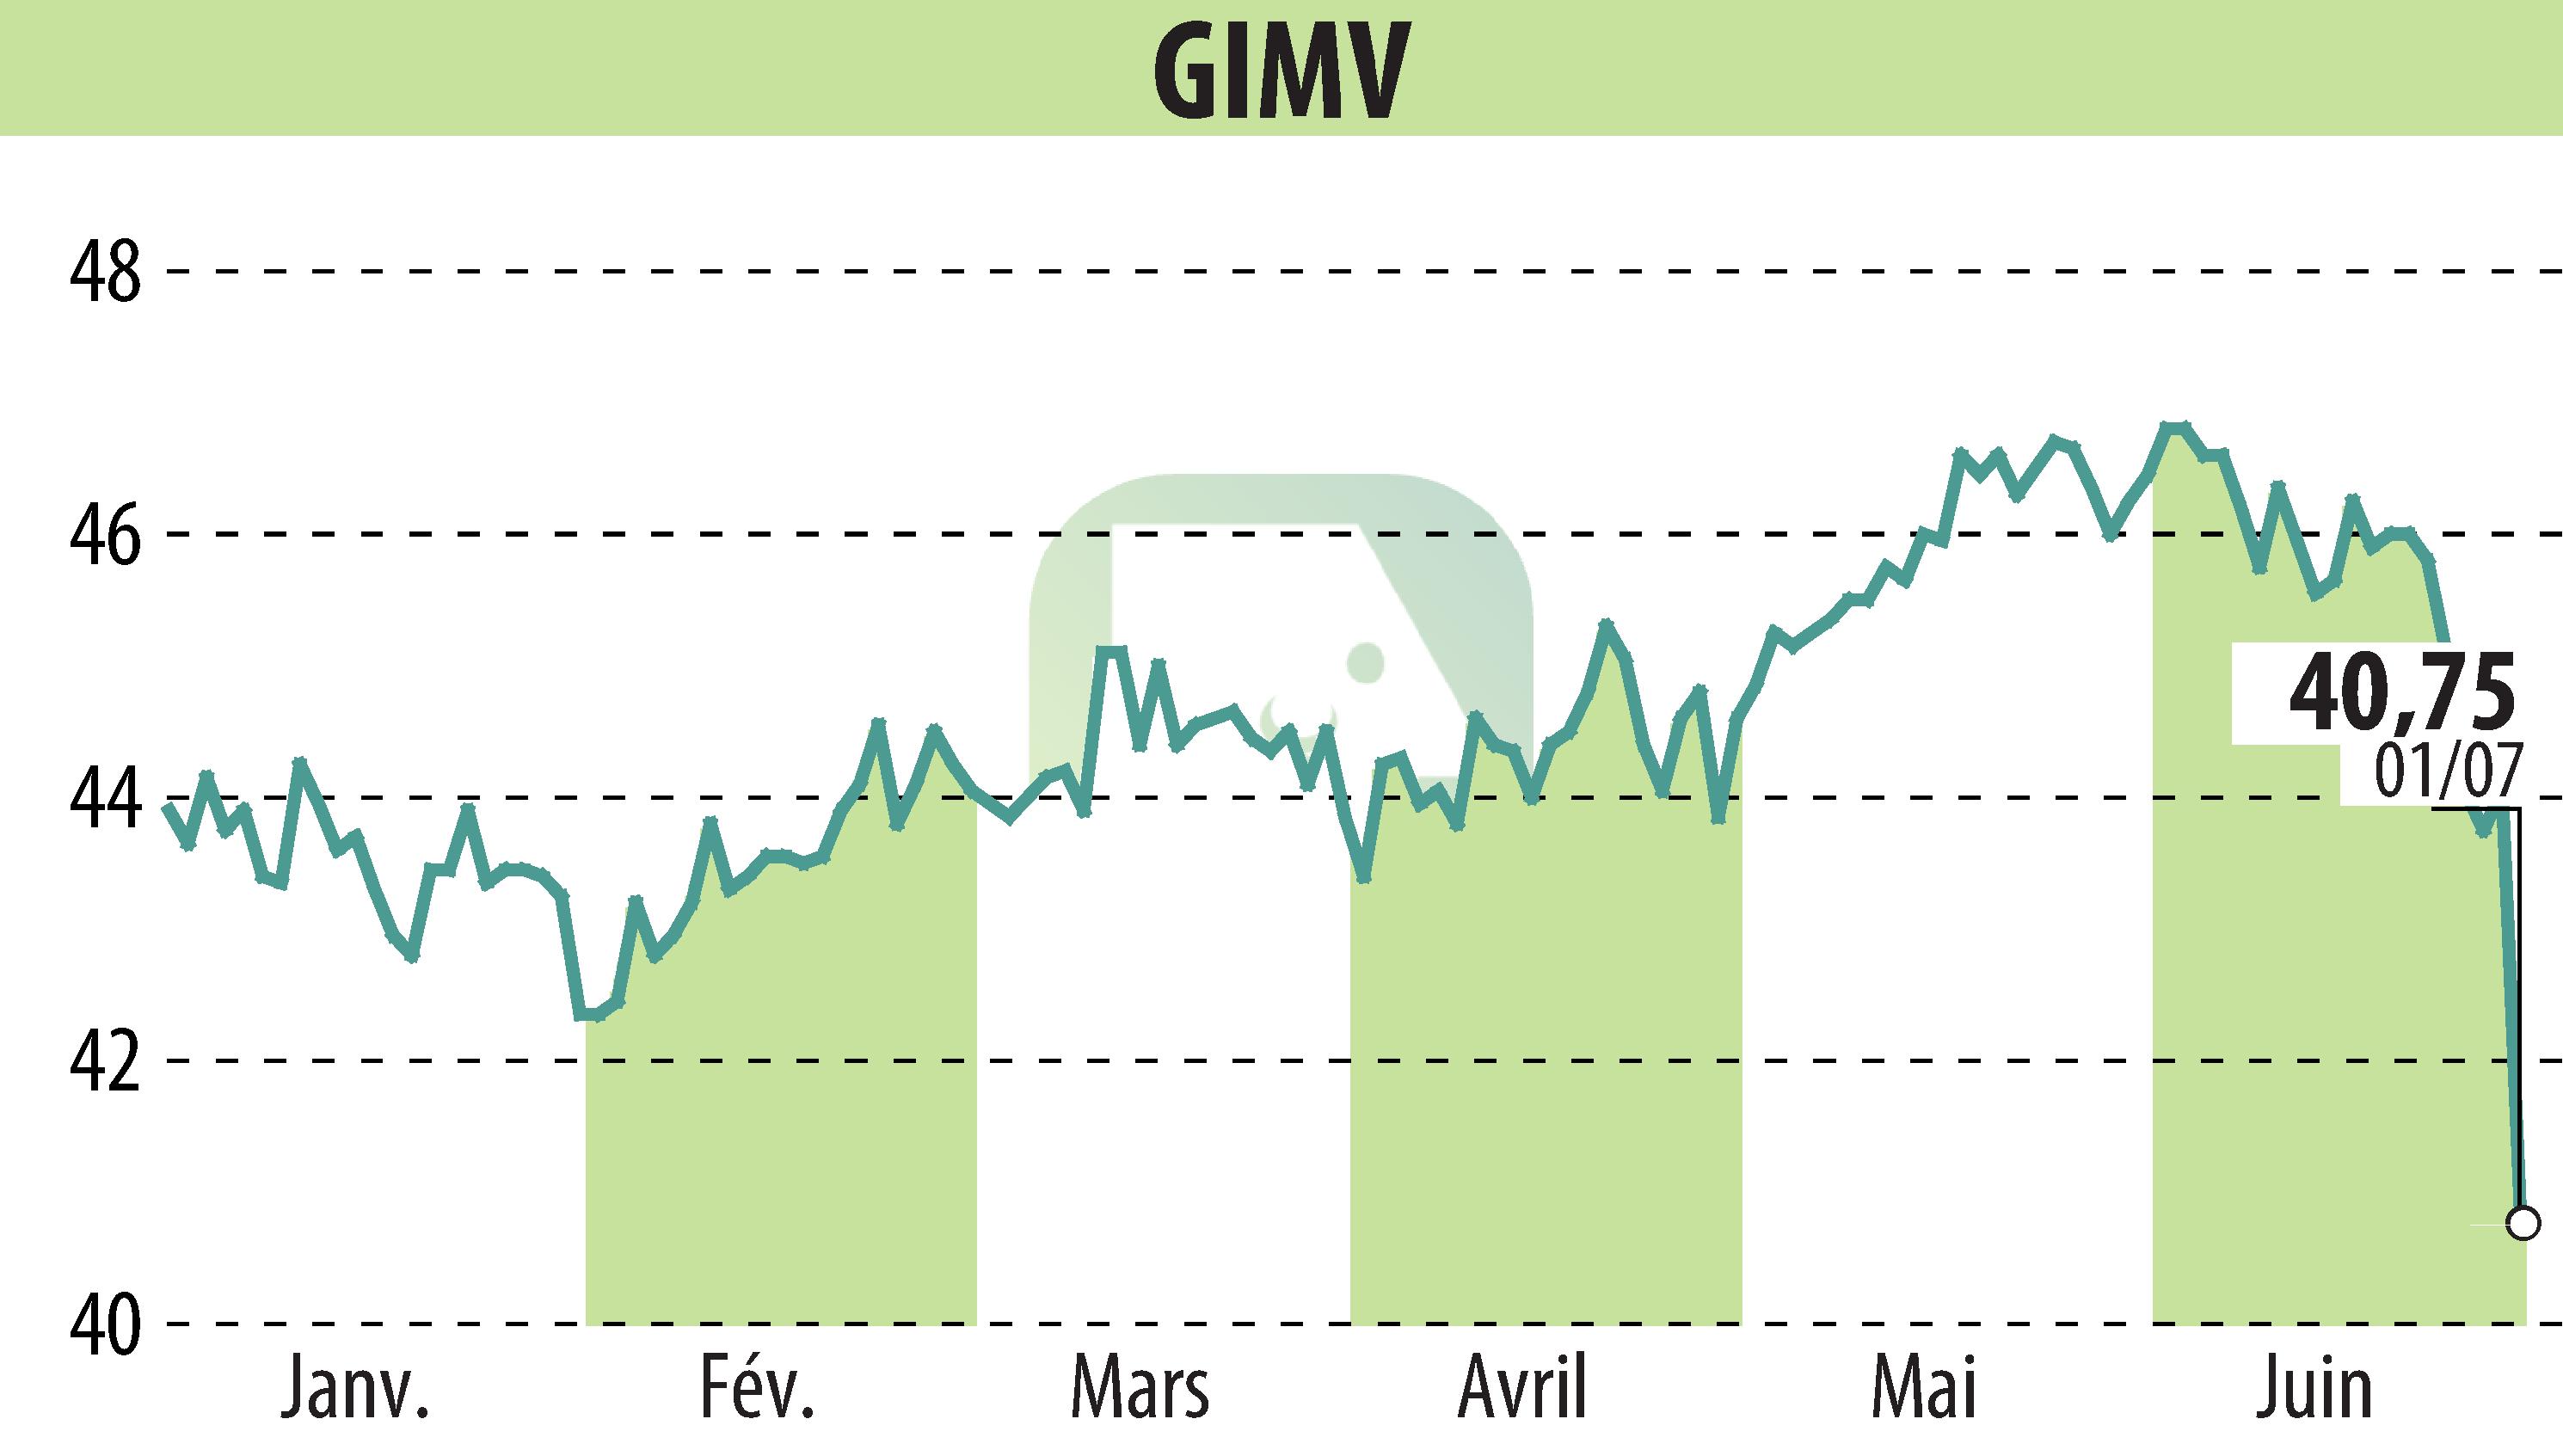 Stock price chart of Gimv (EBR:GIMB) showing fluctuations.